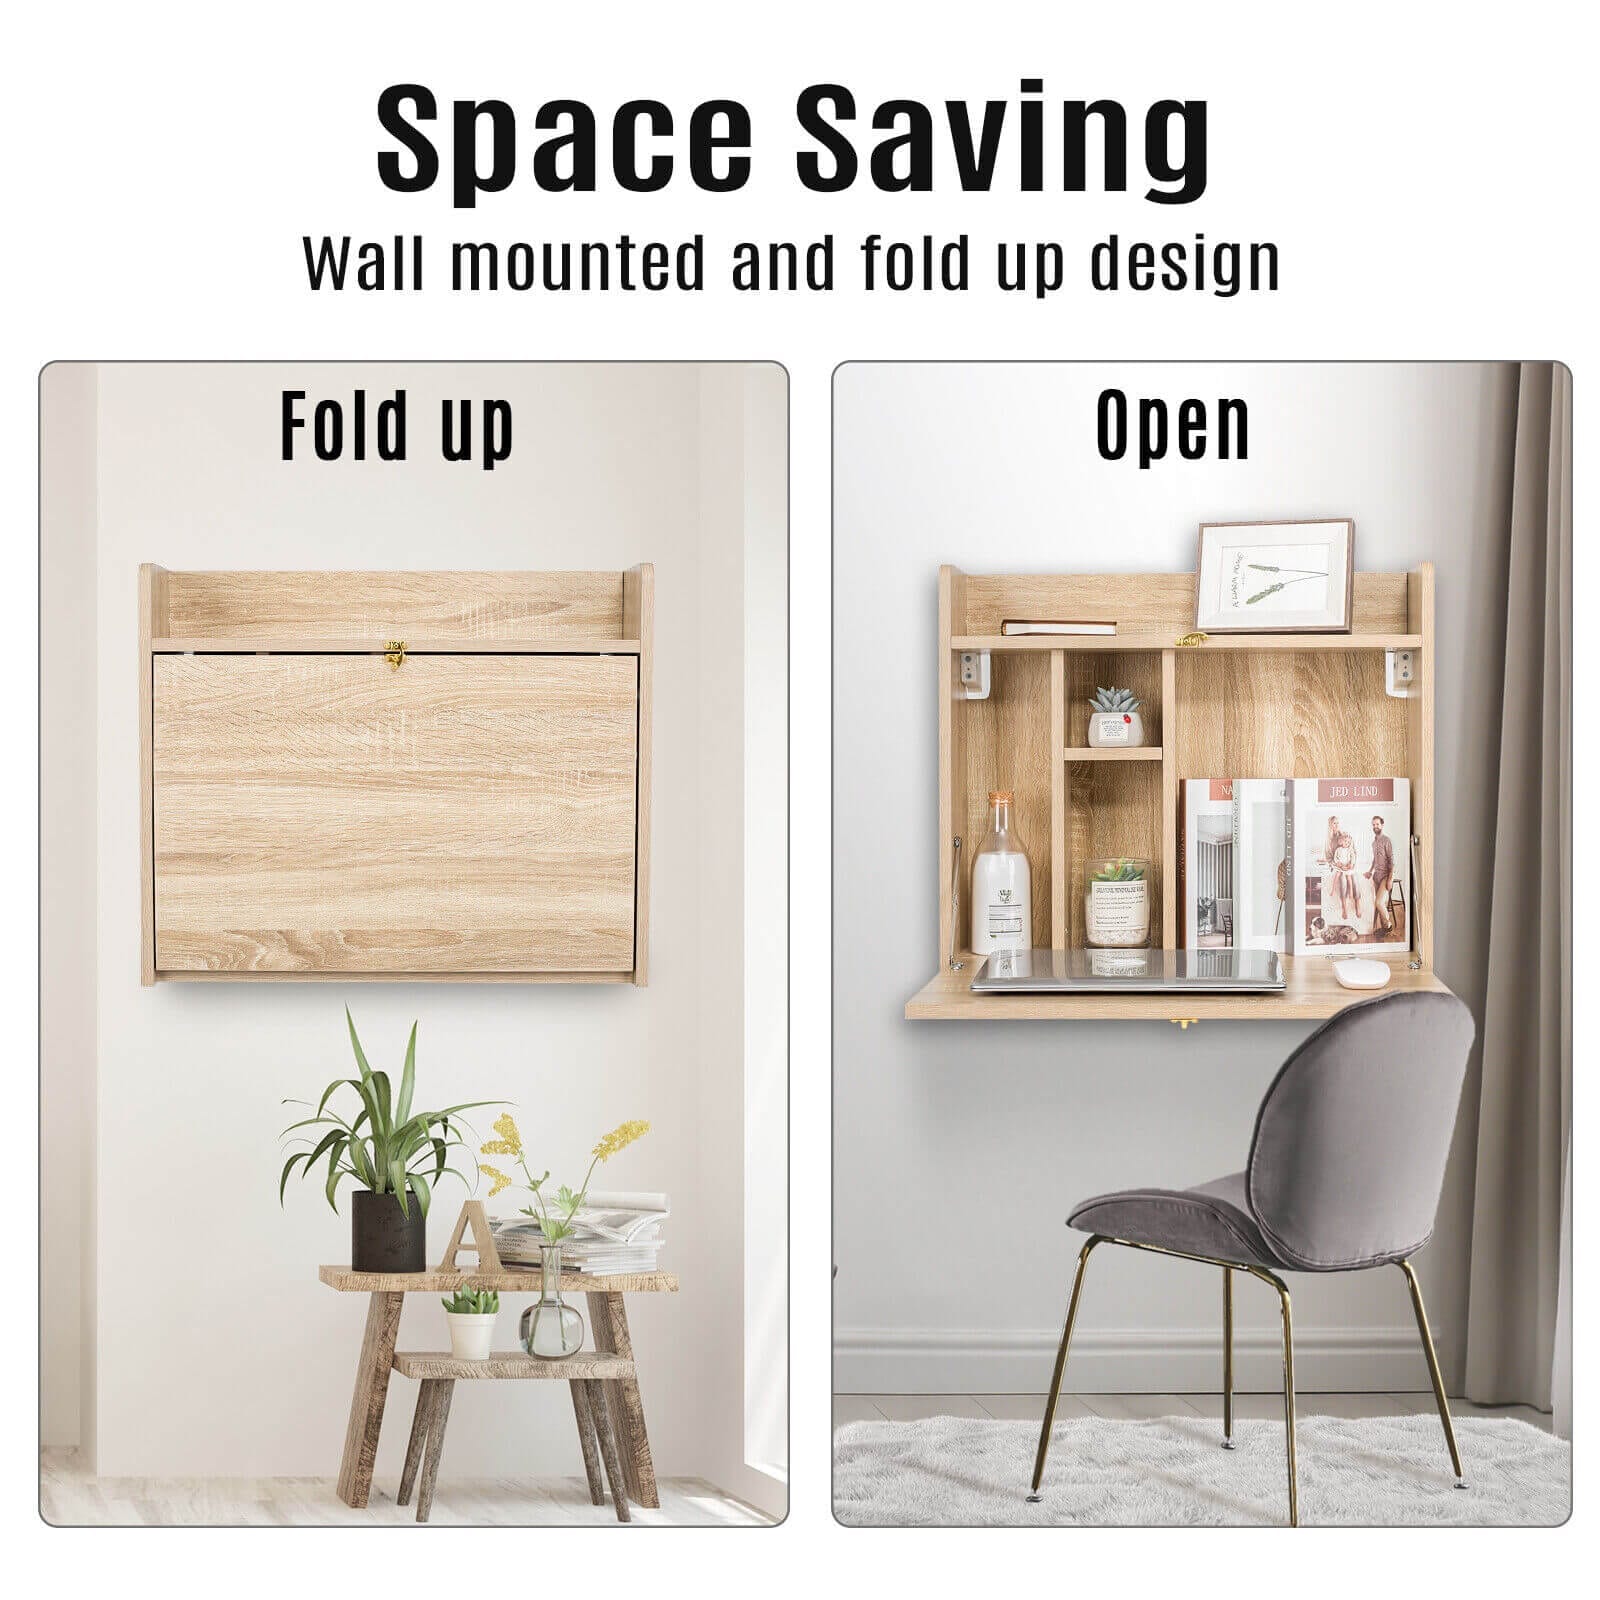 Elecwish Maple Wall Mounted Table Foldable Storage Shelf Wall-Mounted Desk HW1138 has wall mounted and fold up design